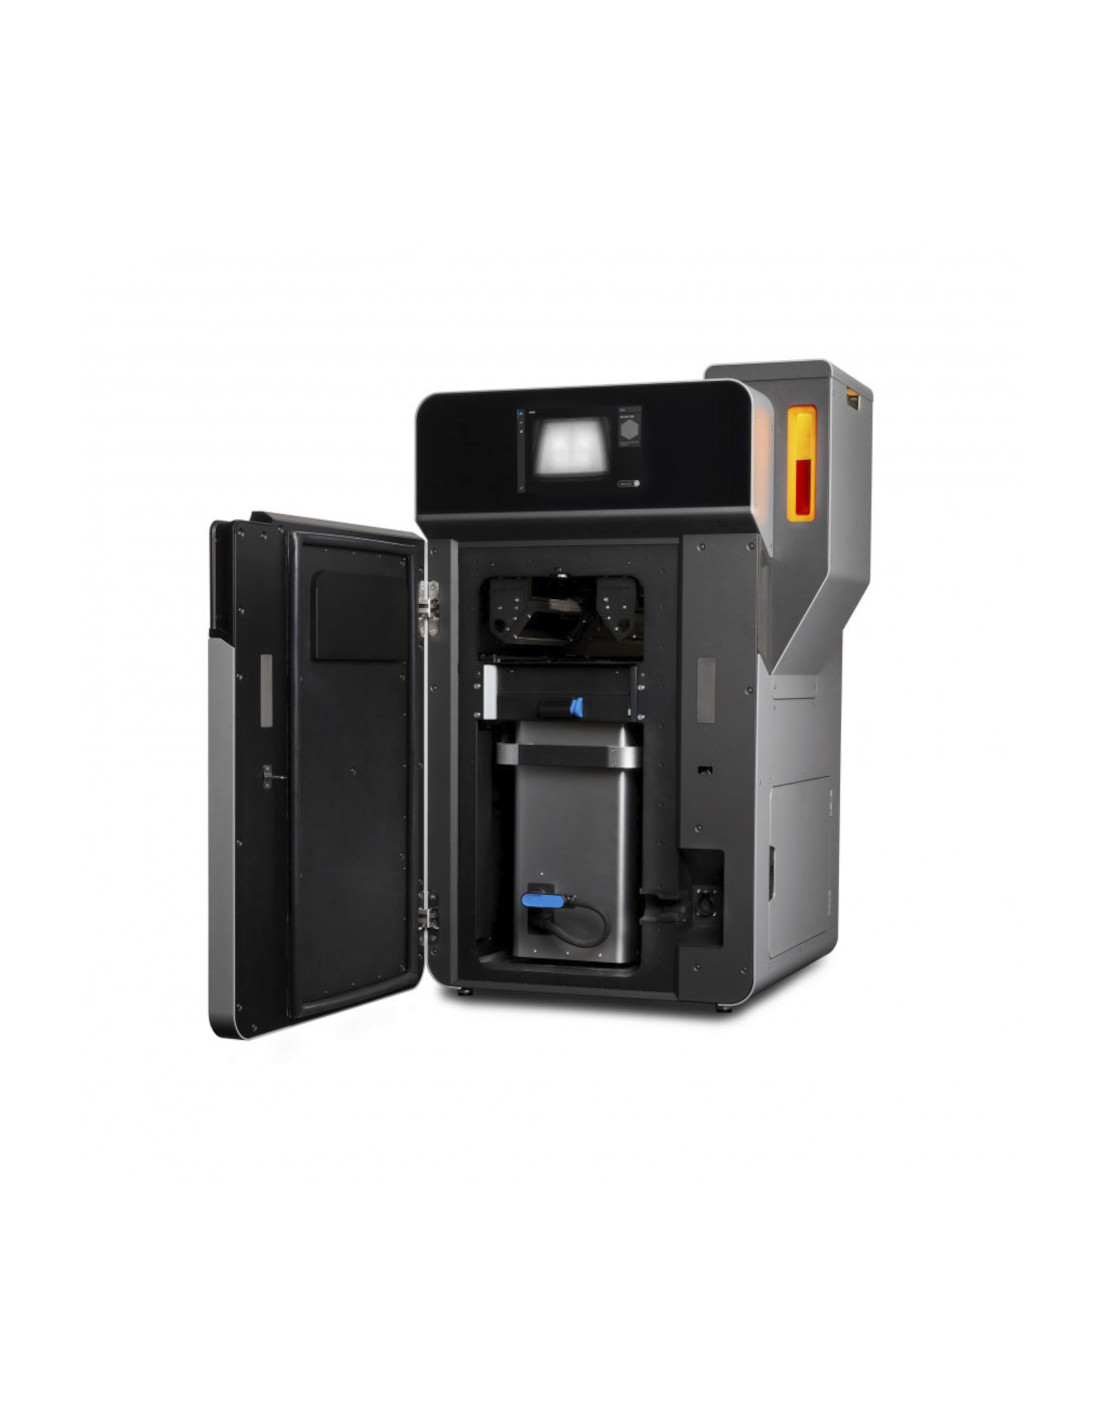 Formlabs Fuse 1+ 30W + SIFT Paquete Completo - impresora 3D industrial